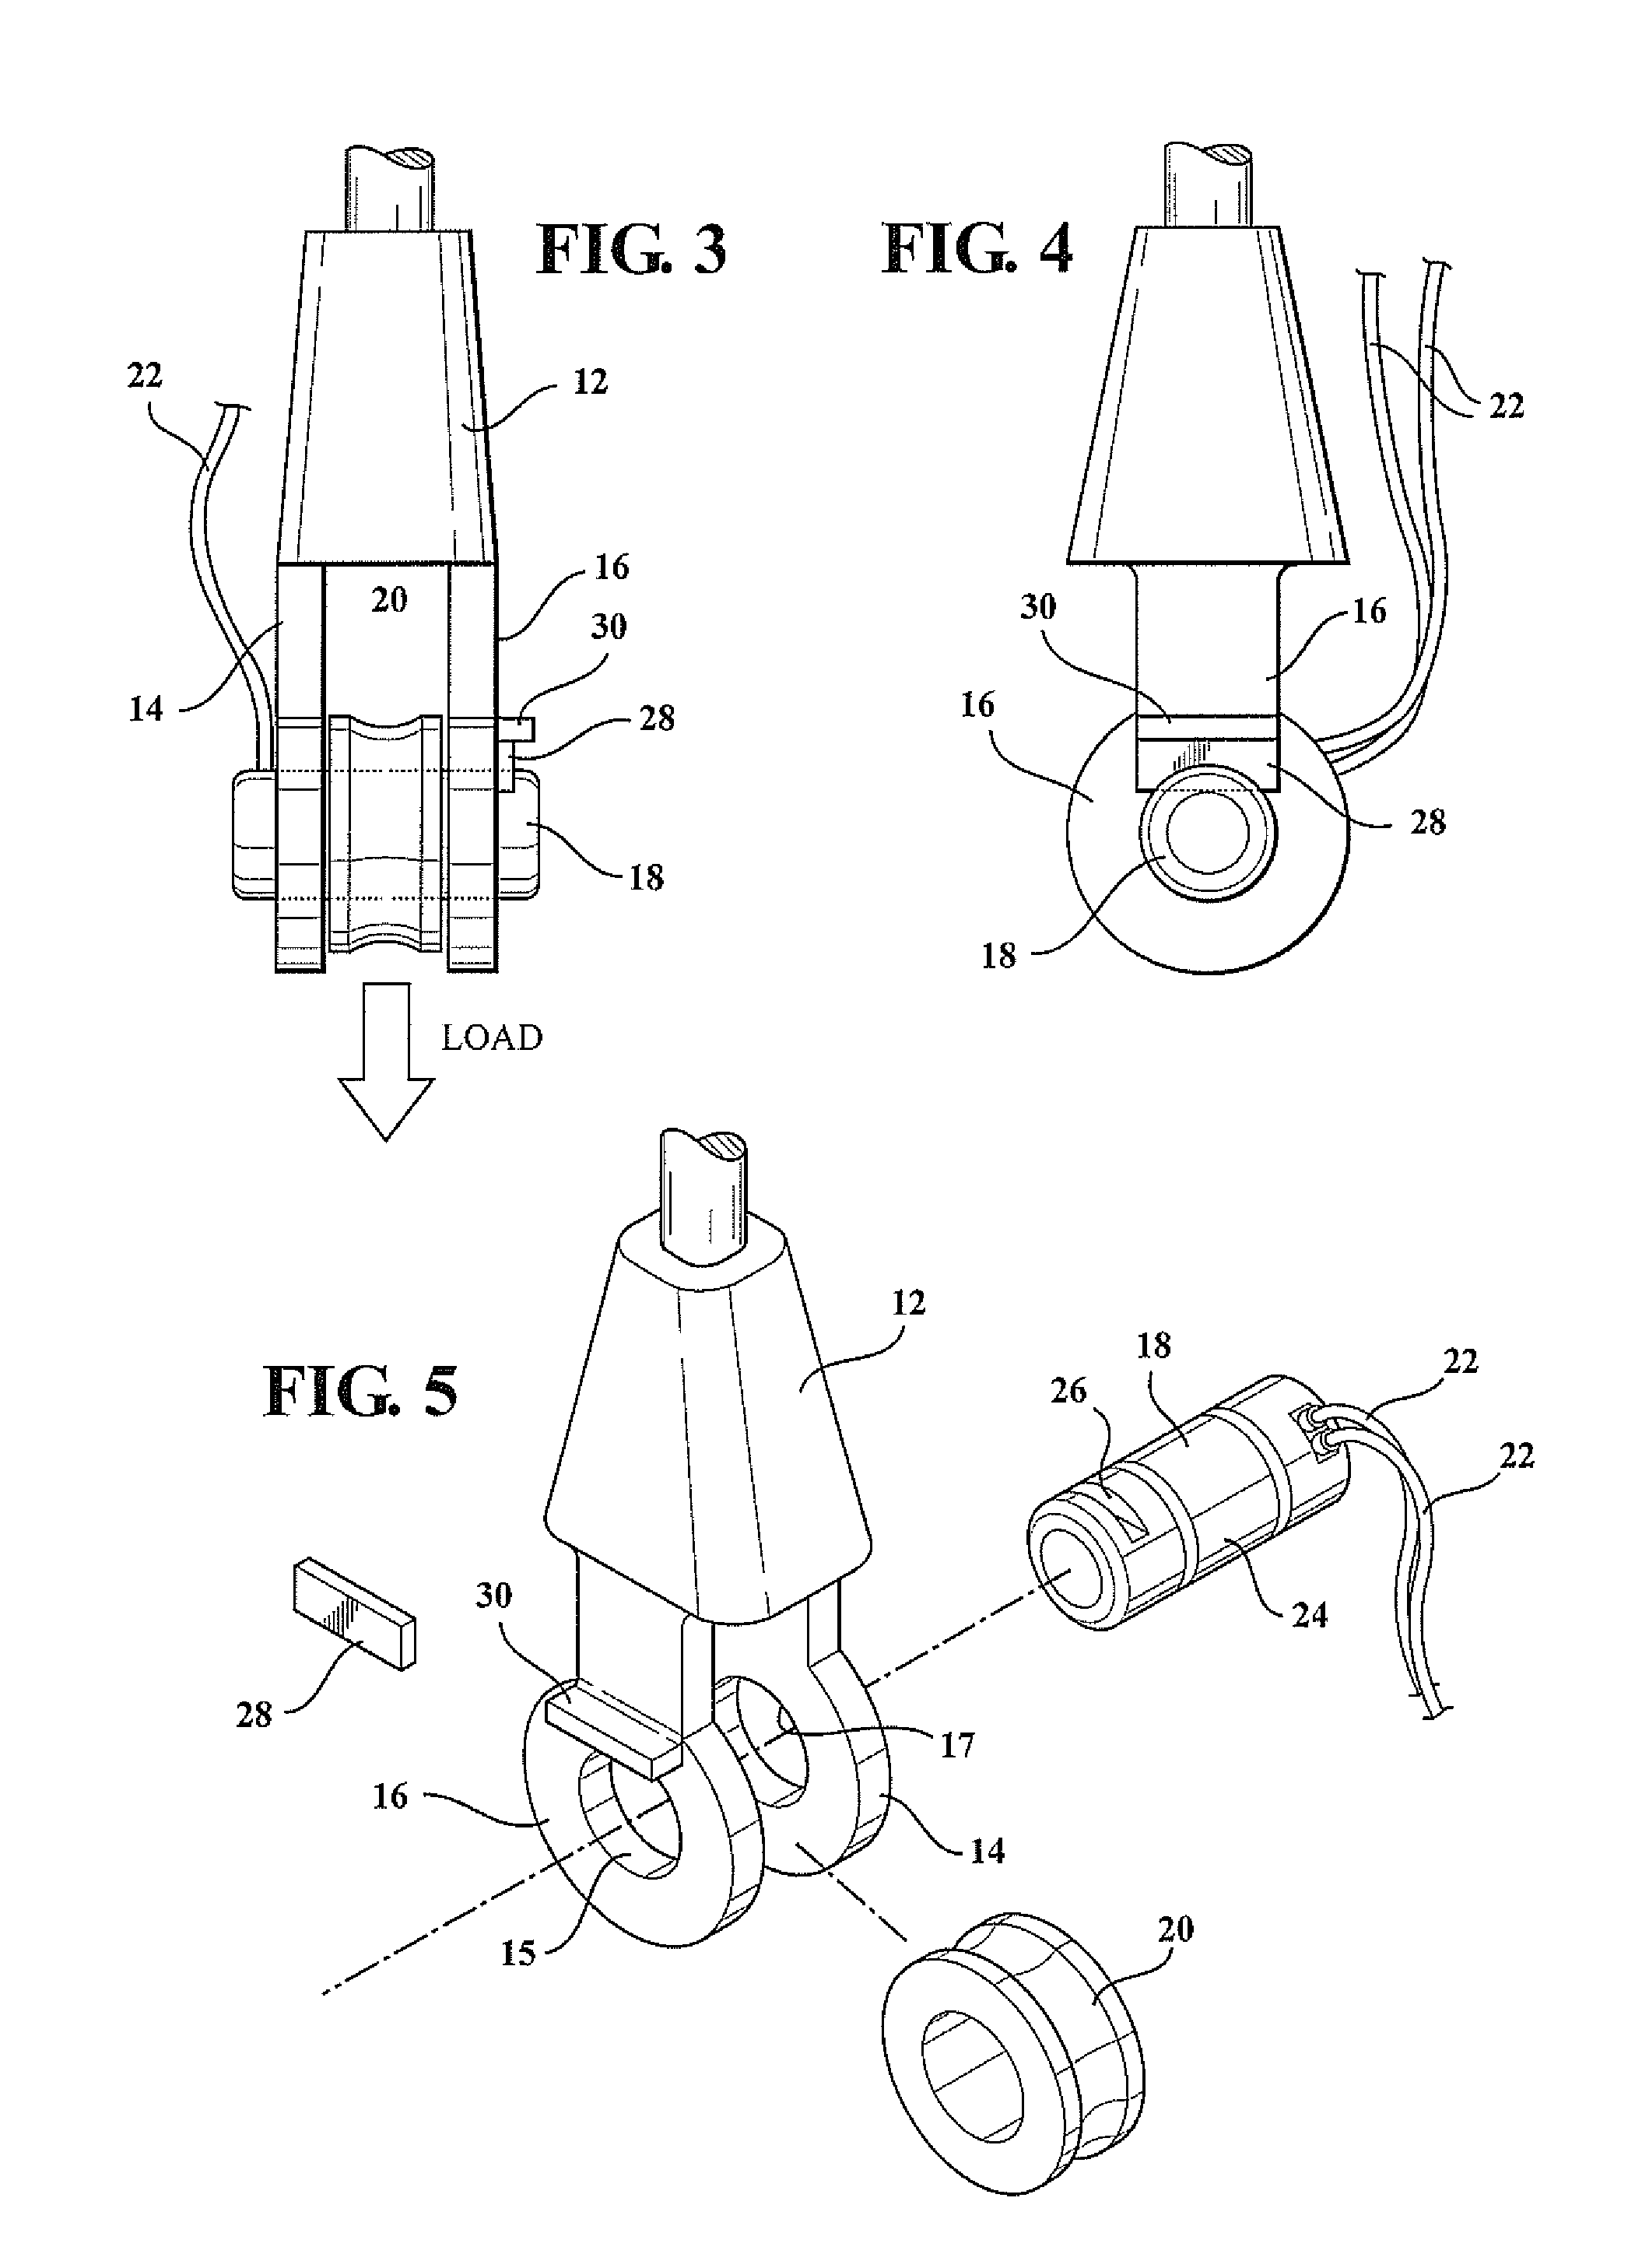 Load and torque sensing systems utilizing magnetic key for mechanical engagement